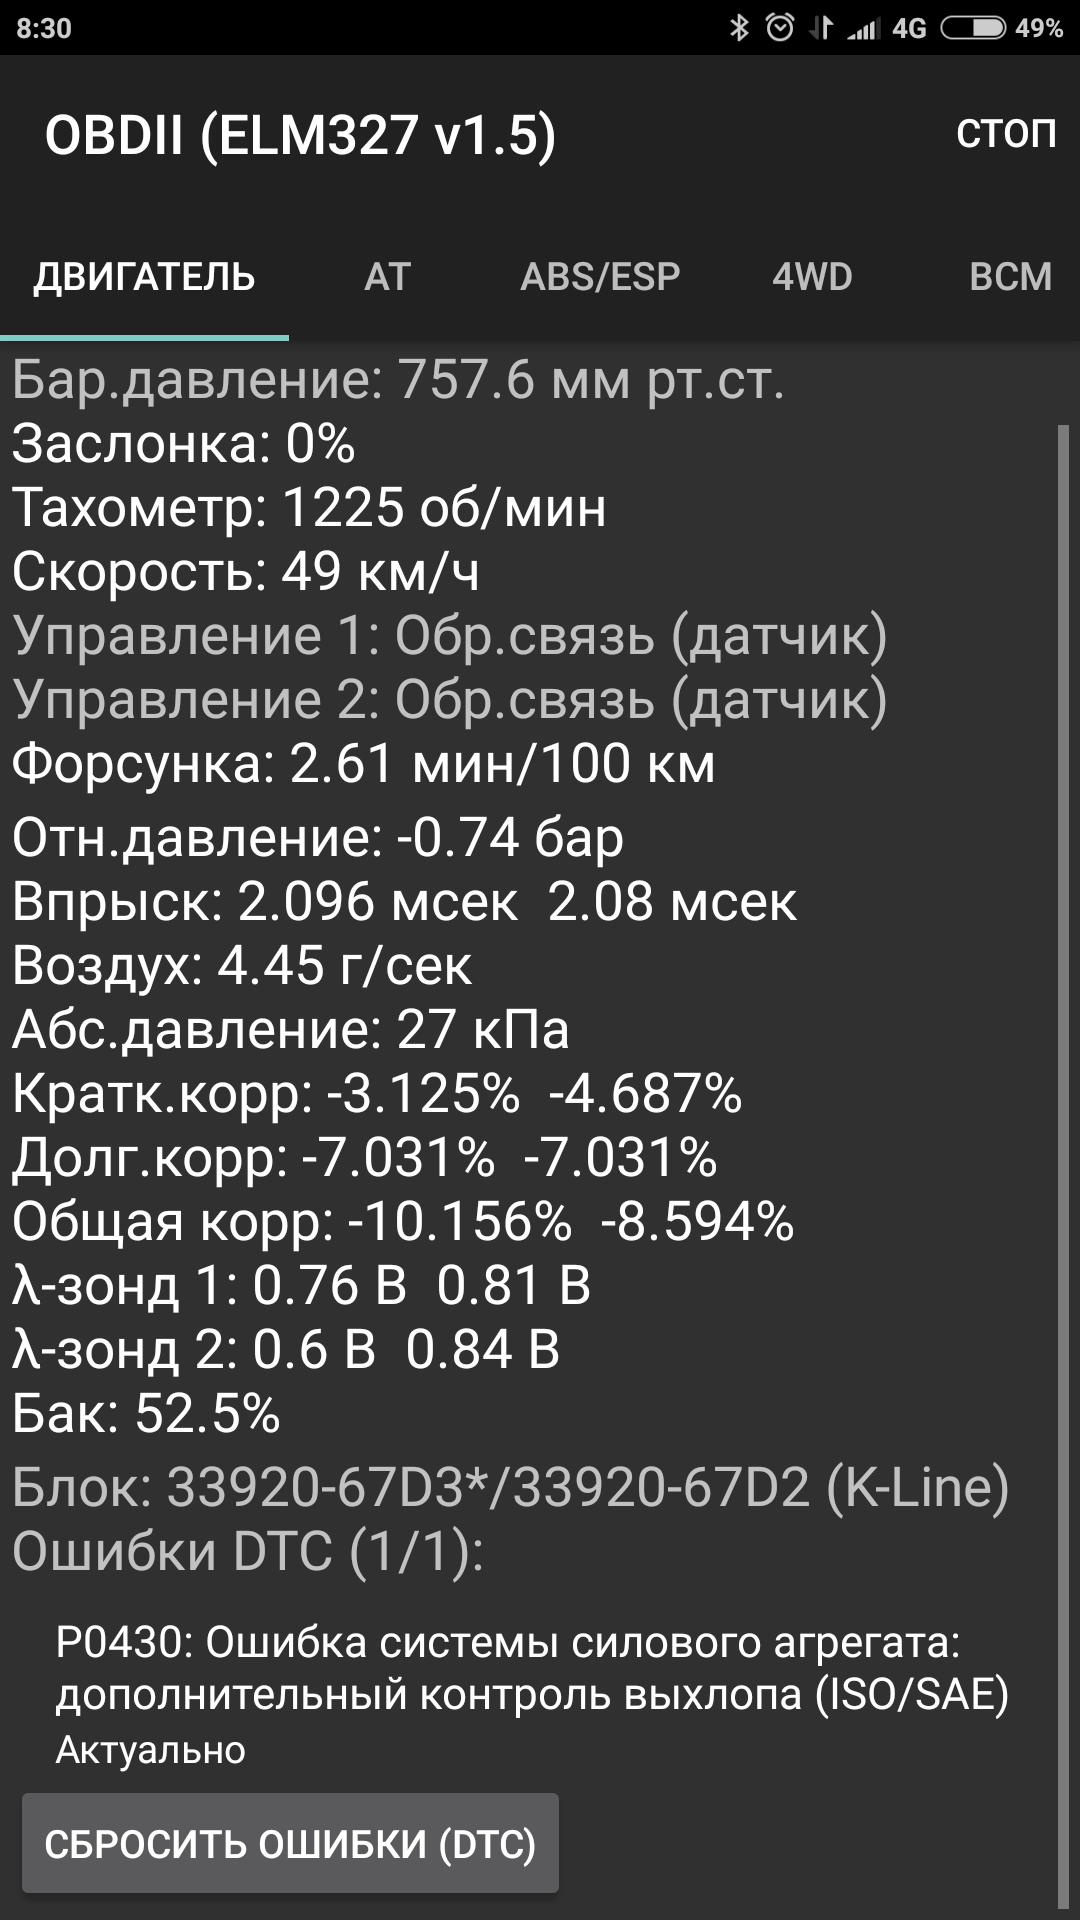 Screenshot_2018-05-21-08-30-05-277_com.malykh.szviewer.android.png